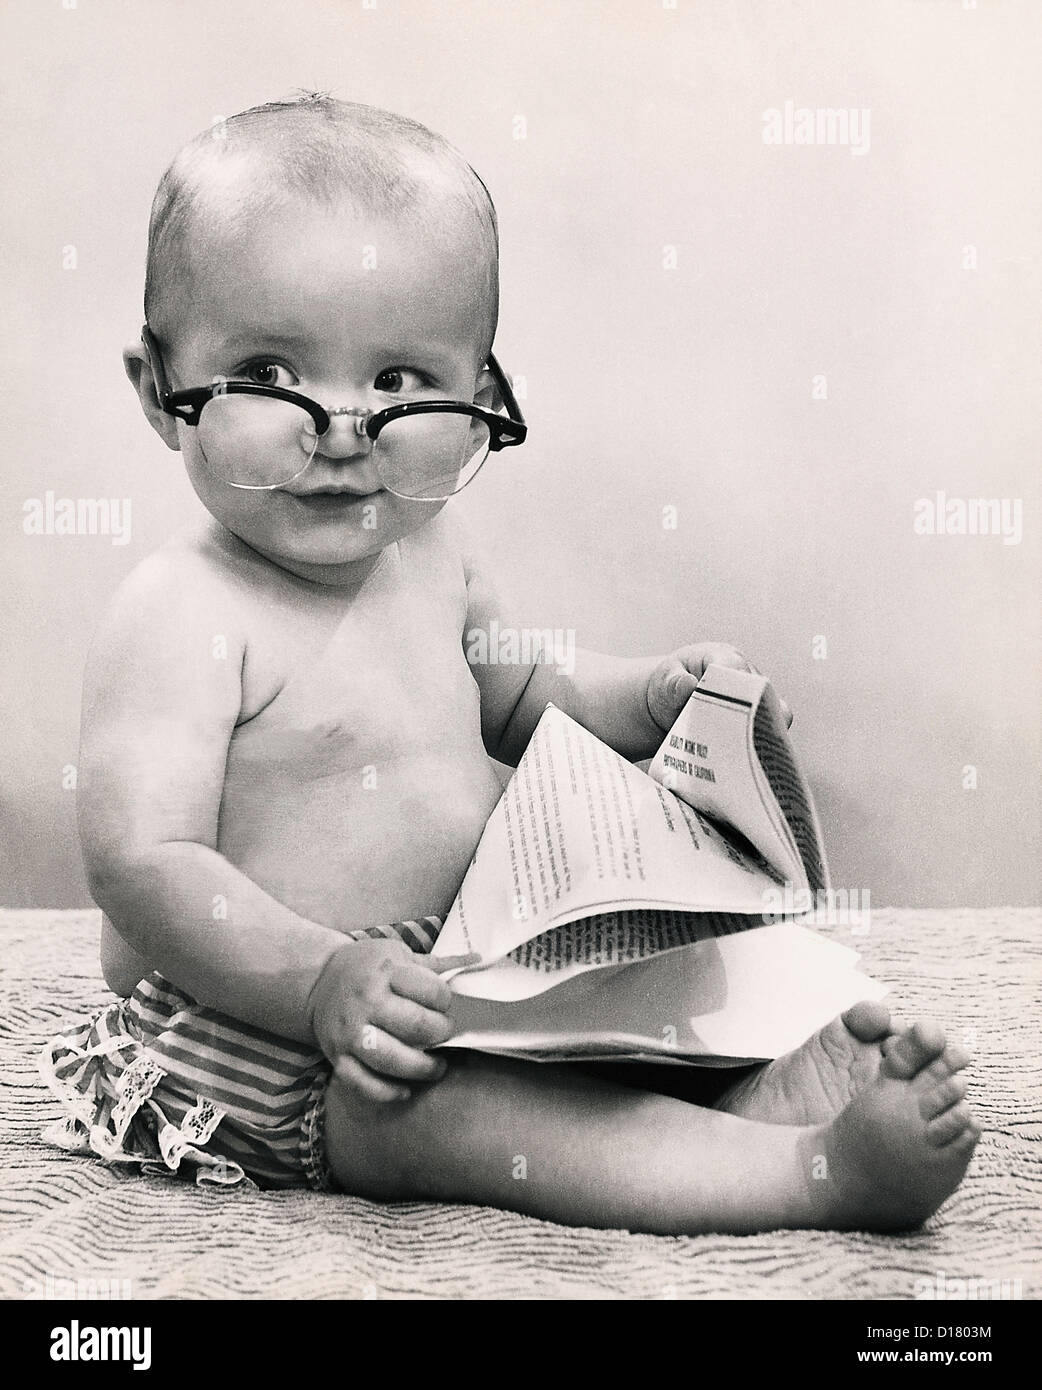 Baby wearing eyeglasses and holding paper Stock Photo